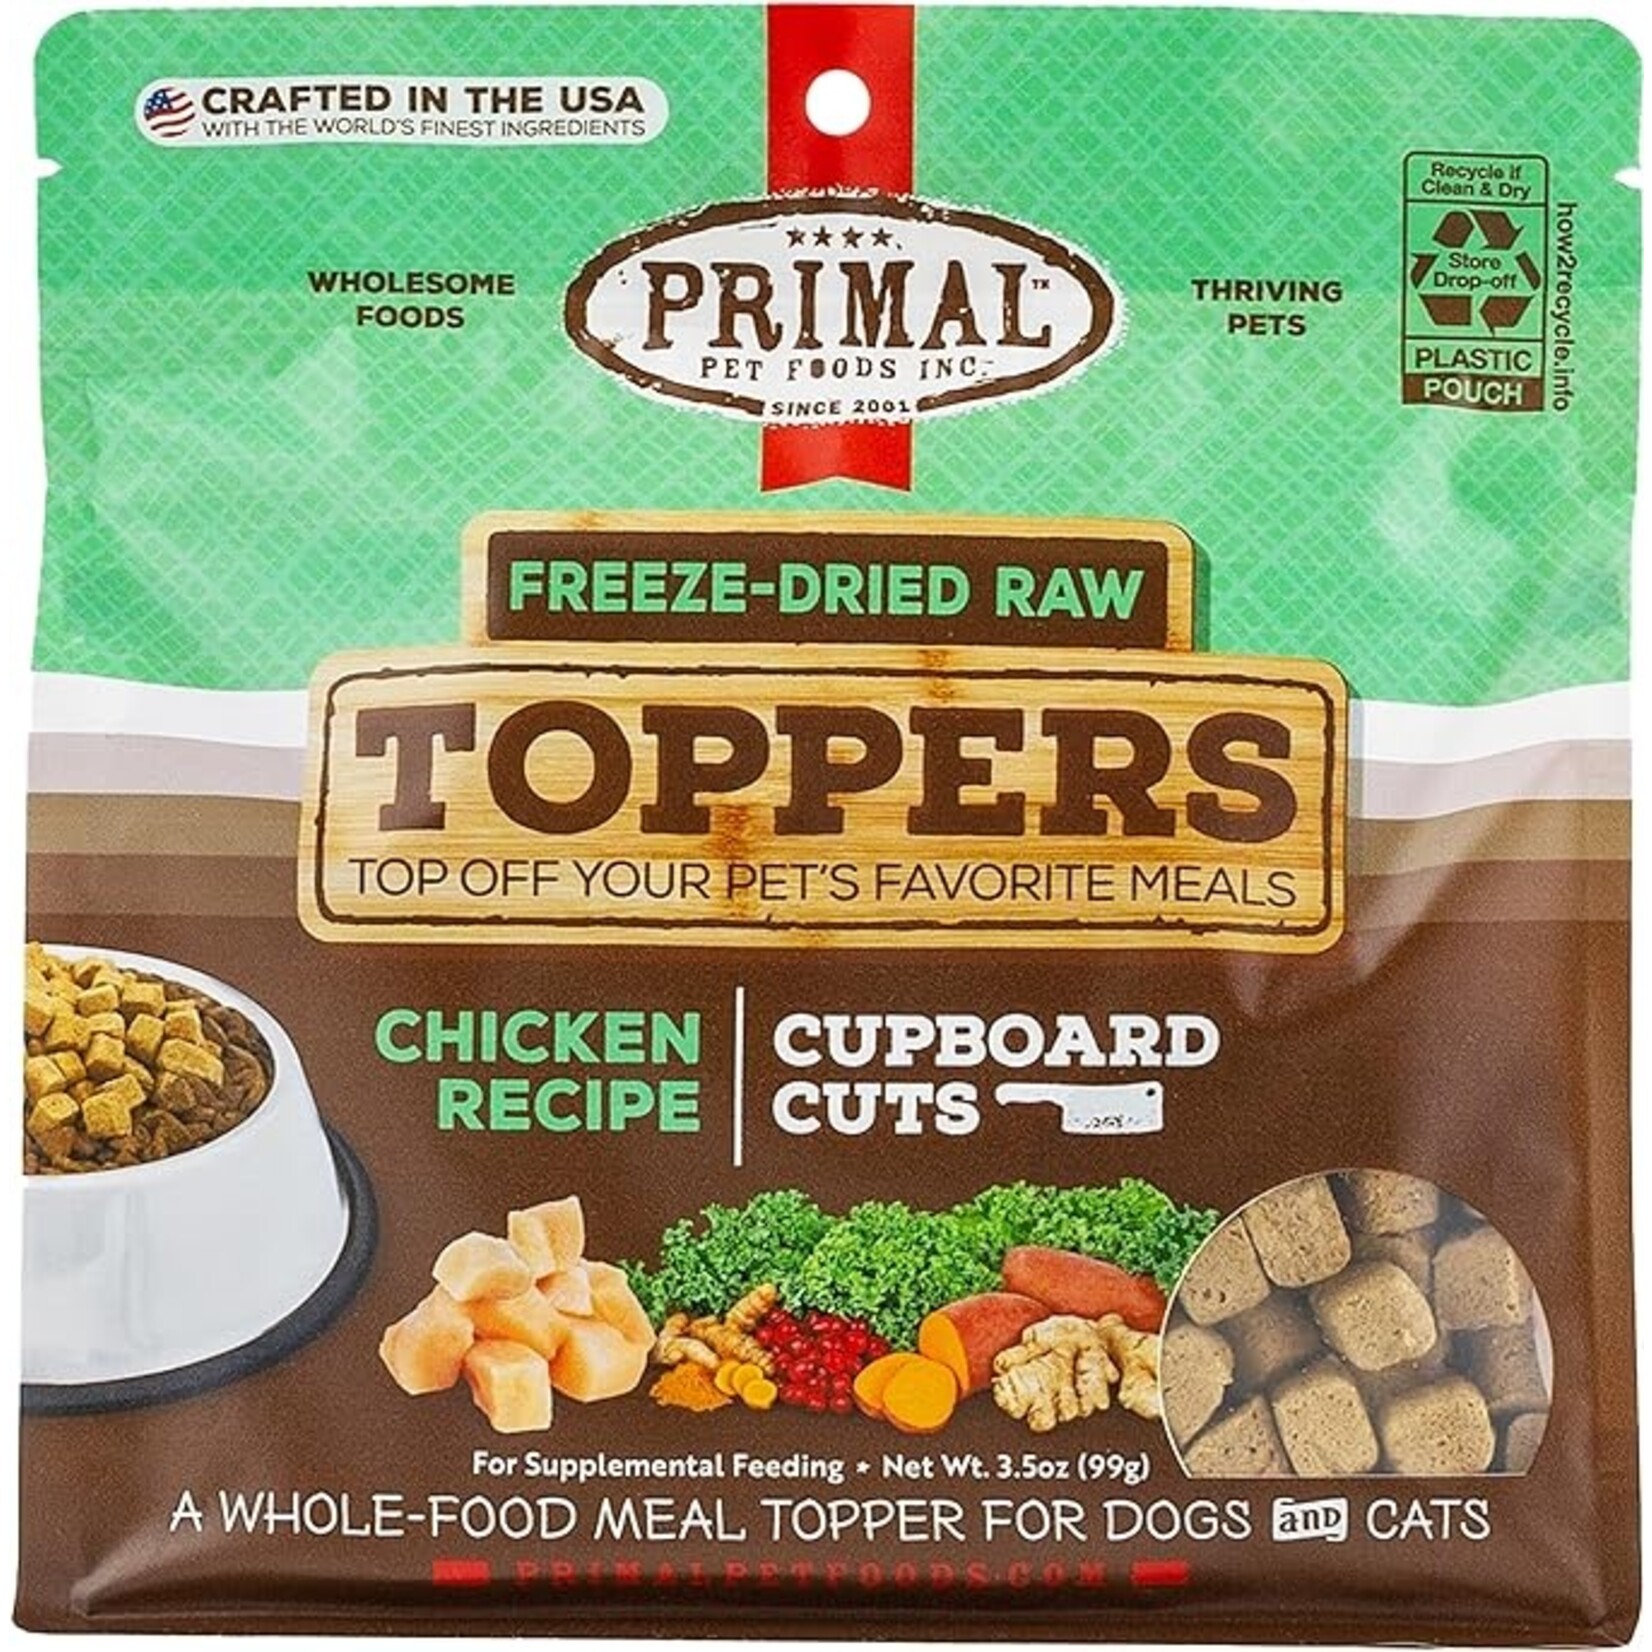 Primal Primal Freeze-Dried Toppers Chicken Cupboard Cuts 3.5oz